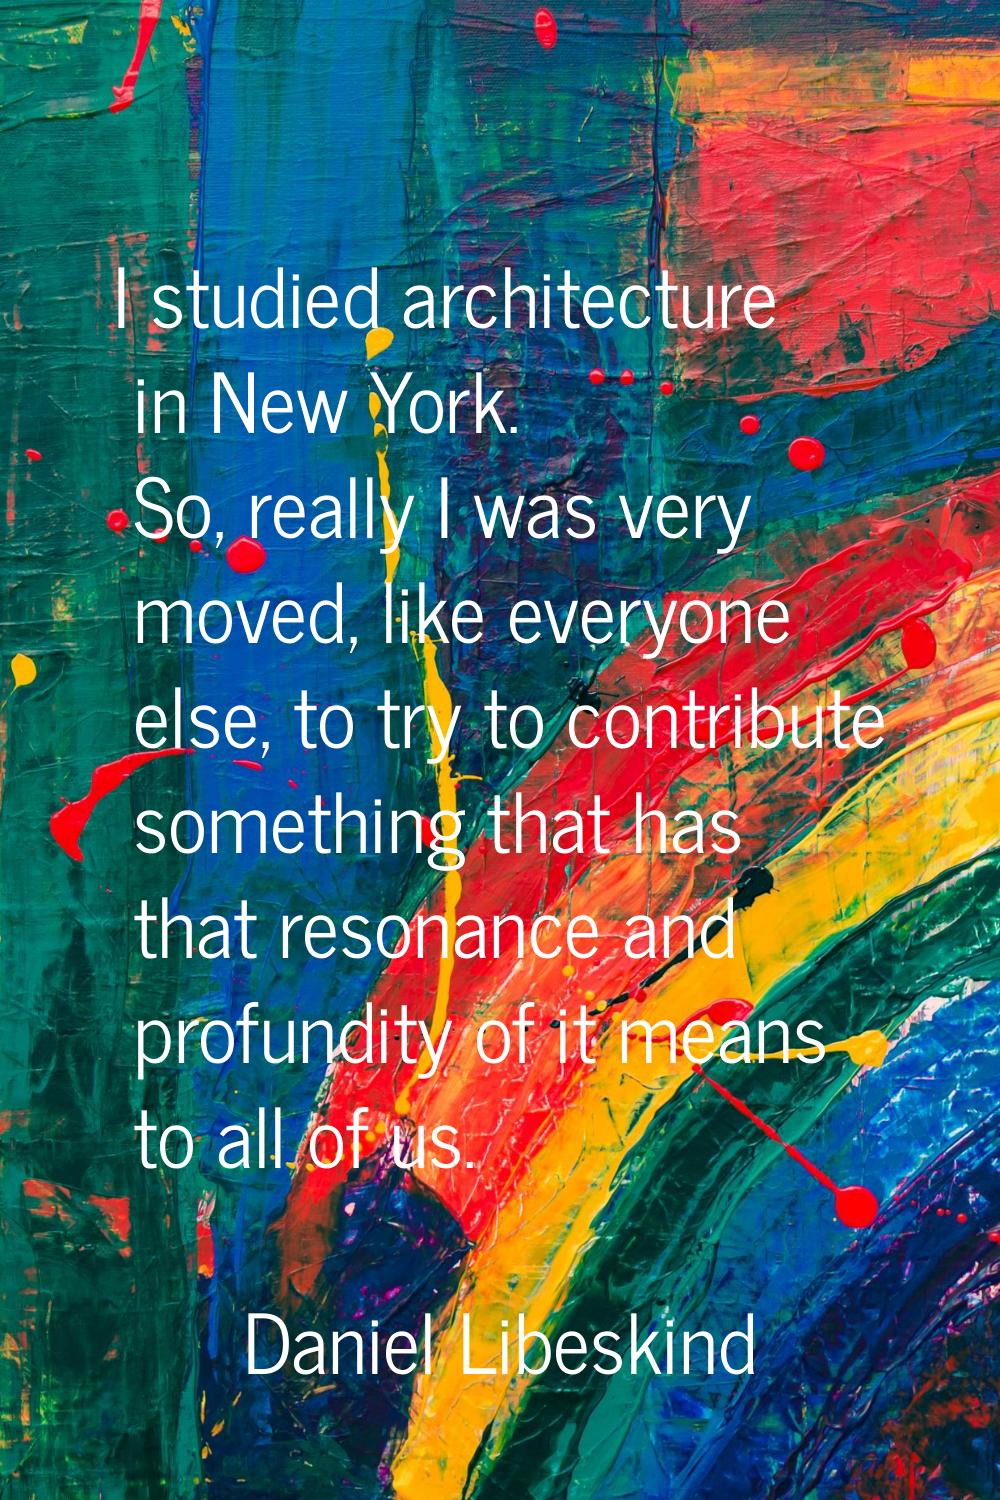 I studied architecture in New York. So, really I was very moved, like everyone else, to try to cont